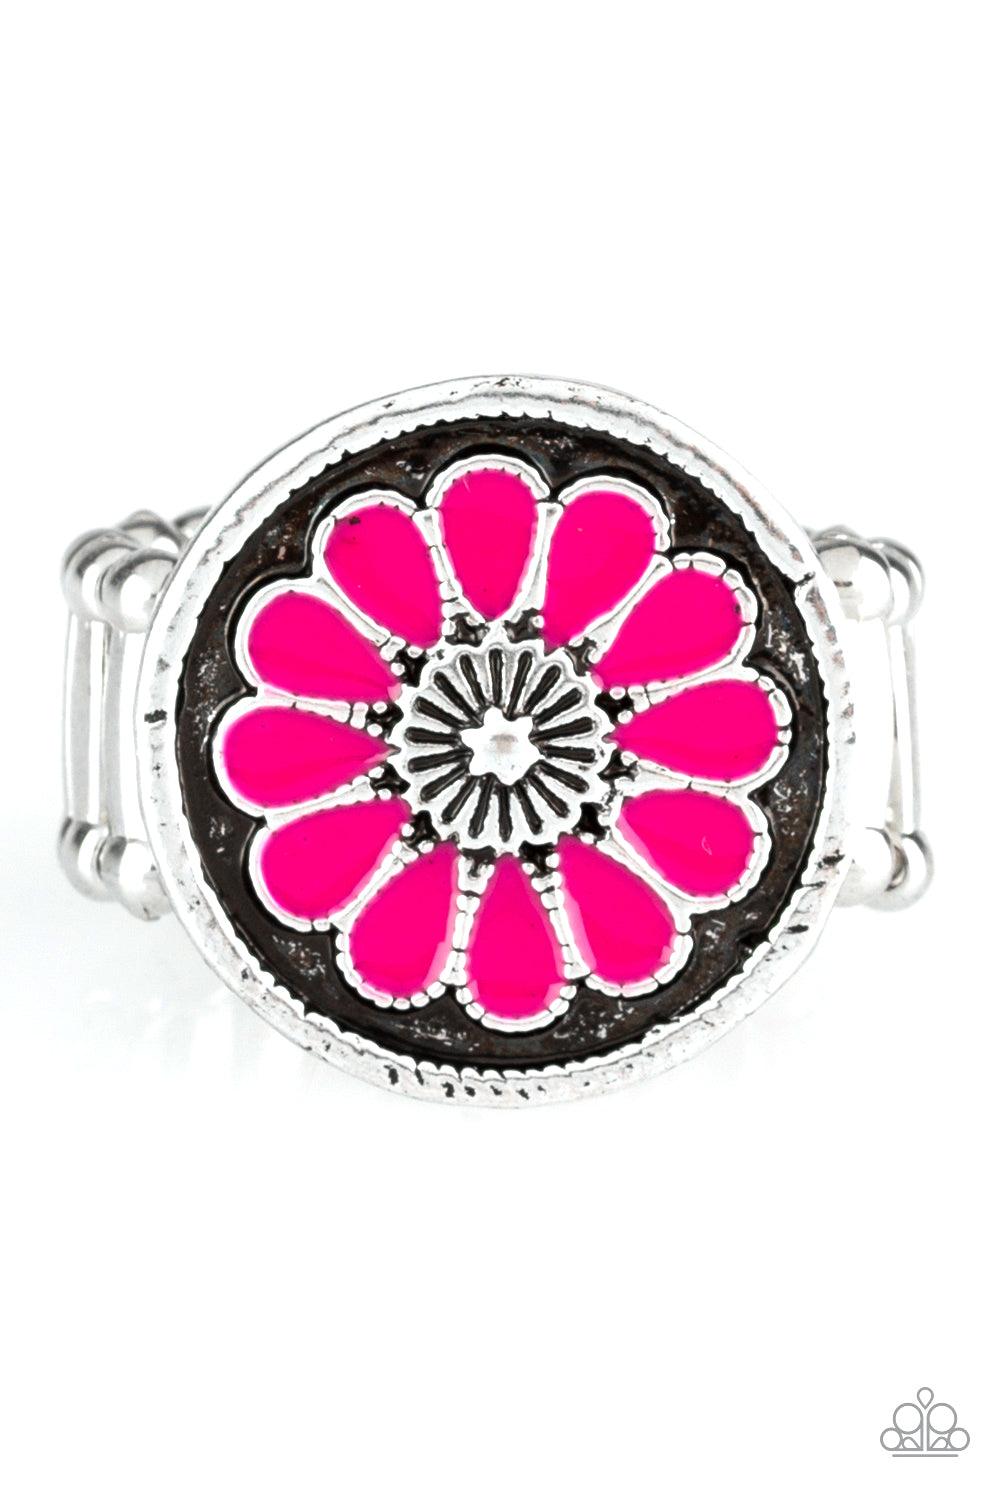 Paparazzi Accessories Garden View - Pink Brushed in an antiqued shimmer, vivacious pink petals spin into a whimsical floral pattern atop the finger. Features a stretchy band for a flexible fit. Sold as one individual ring. Jewelry